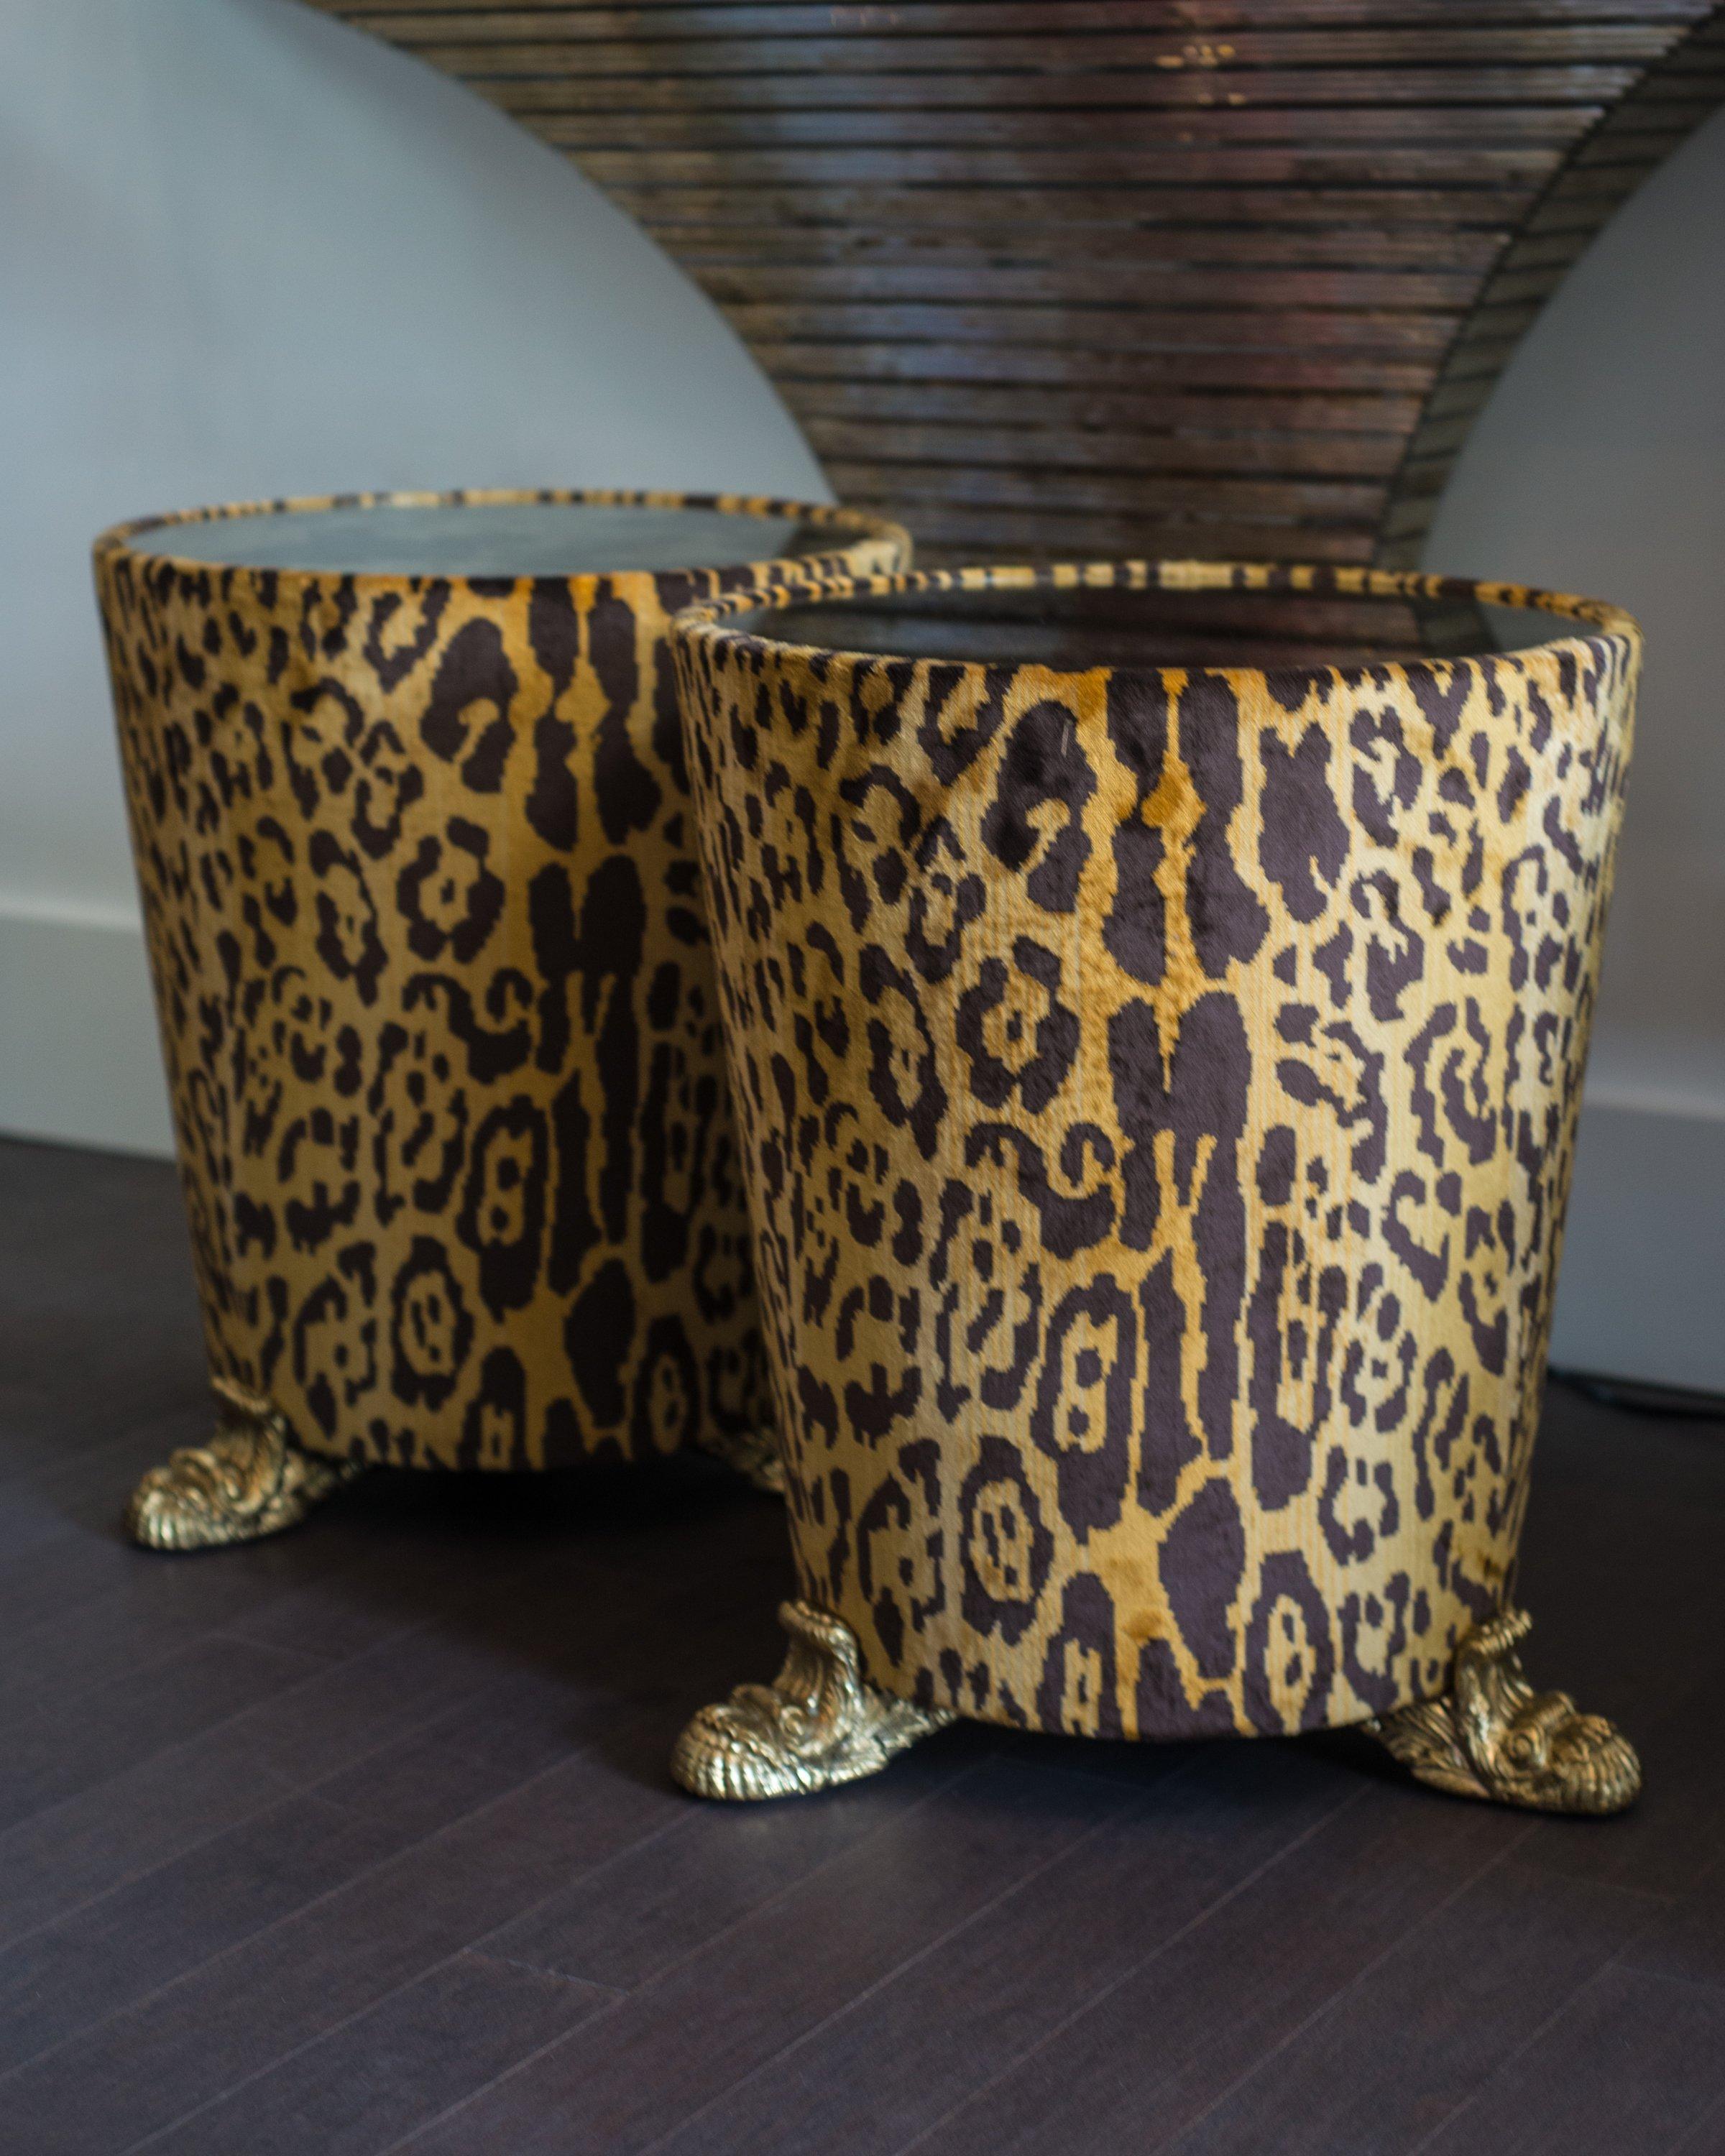 Introducing a new exclusive design from Studio Maison Nurita, an extravagant handmade side table in leopard silk velvet. Perfection is in the details and these rich tables are upholstered in a Bevilacqua fabric, with antique mirrored tops and